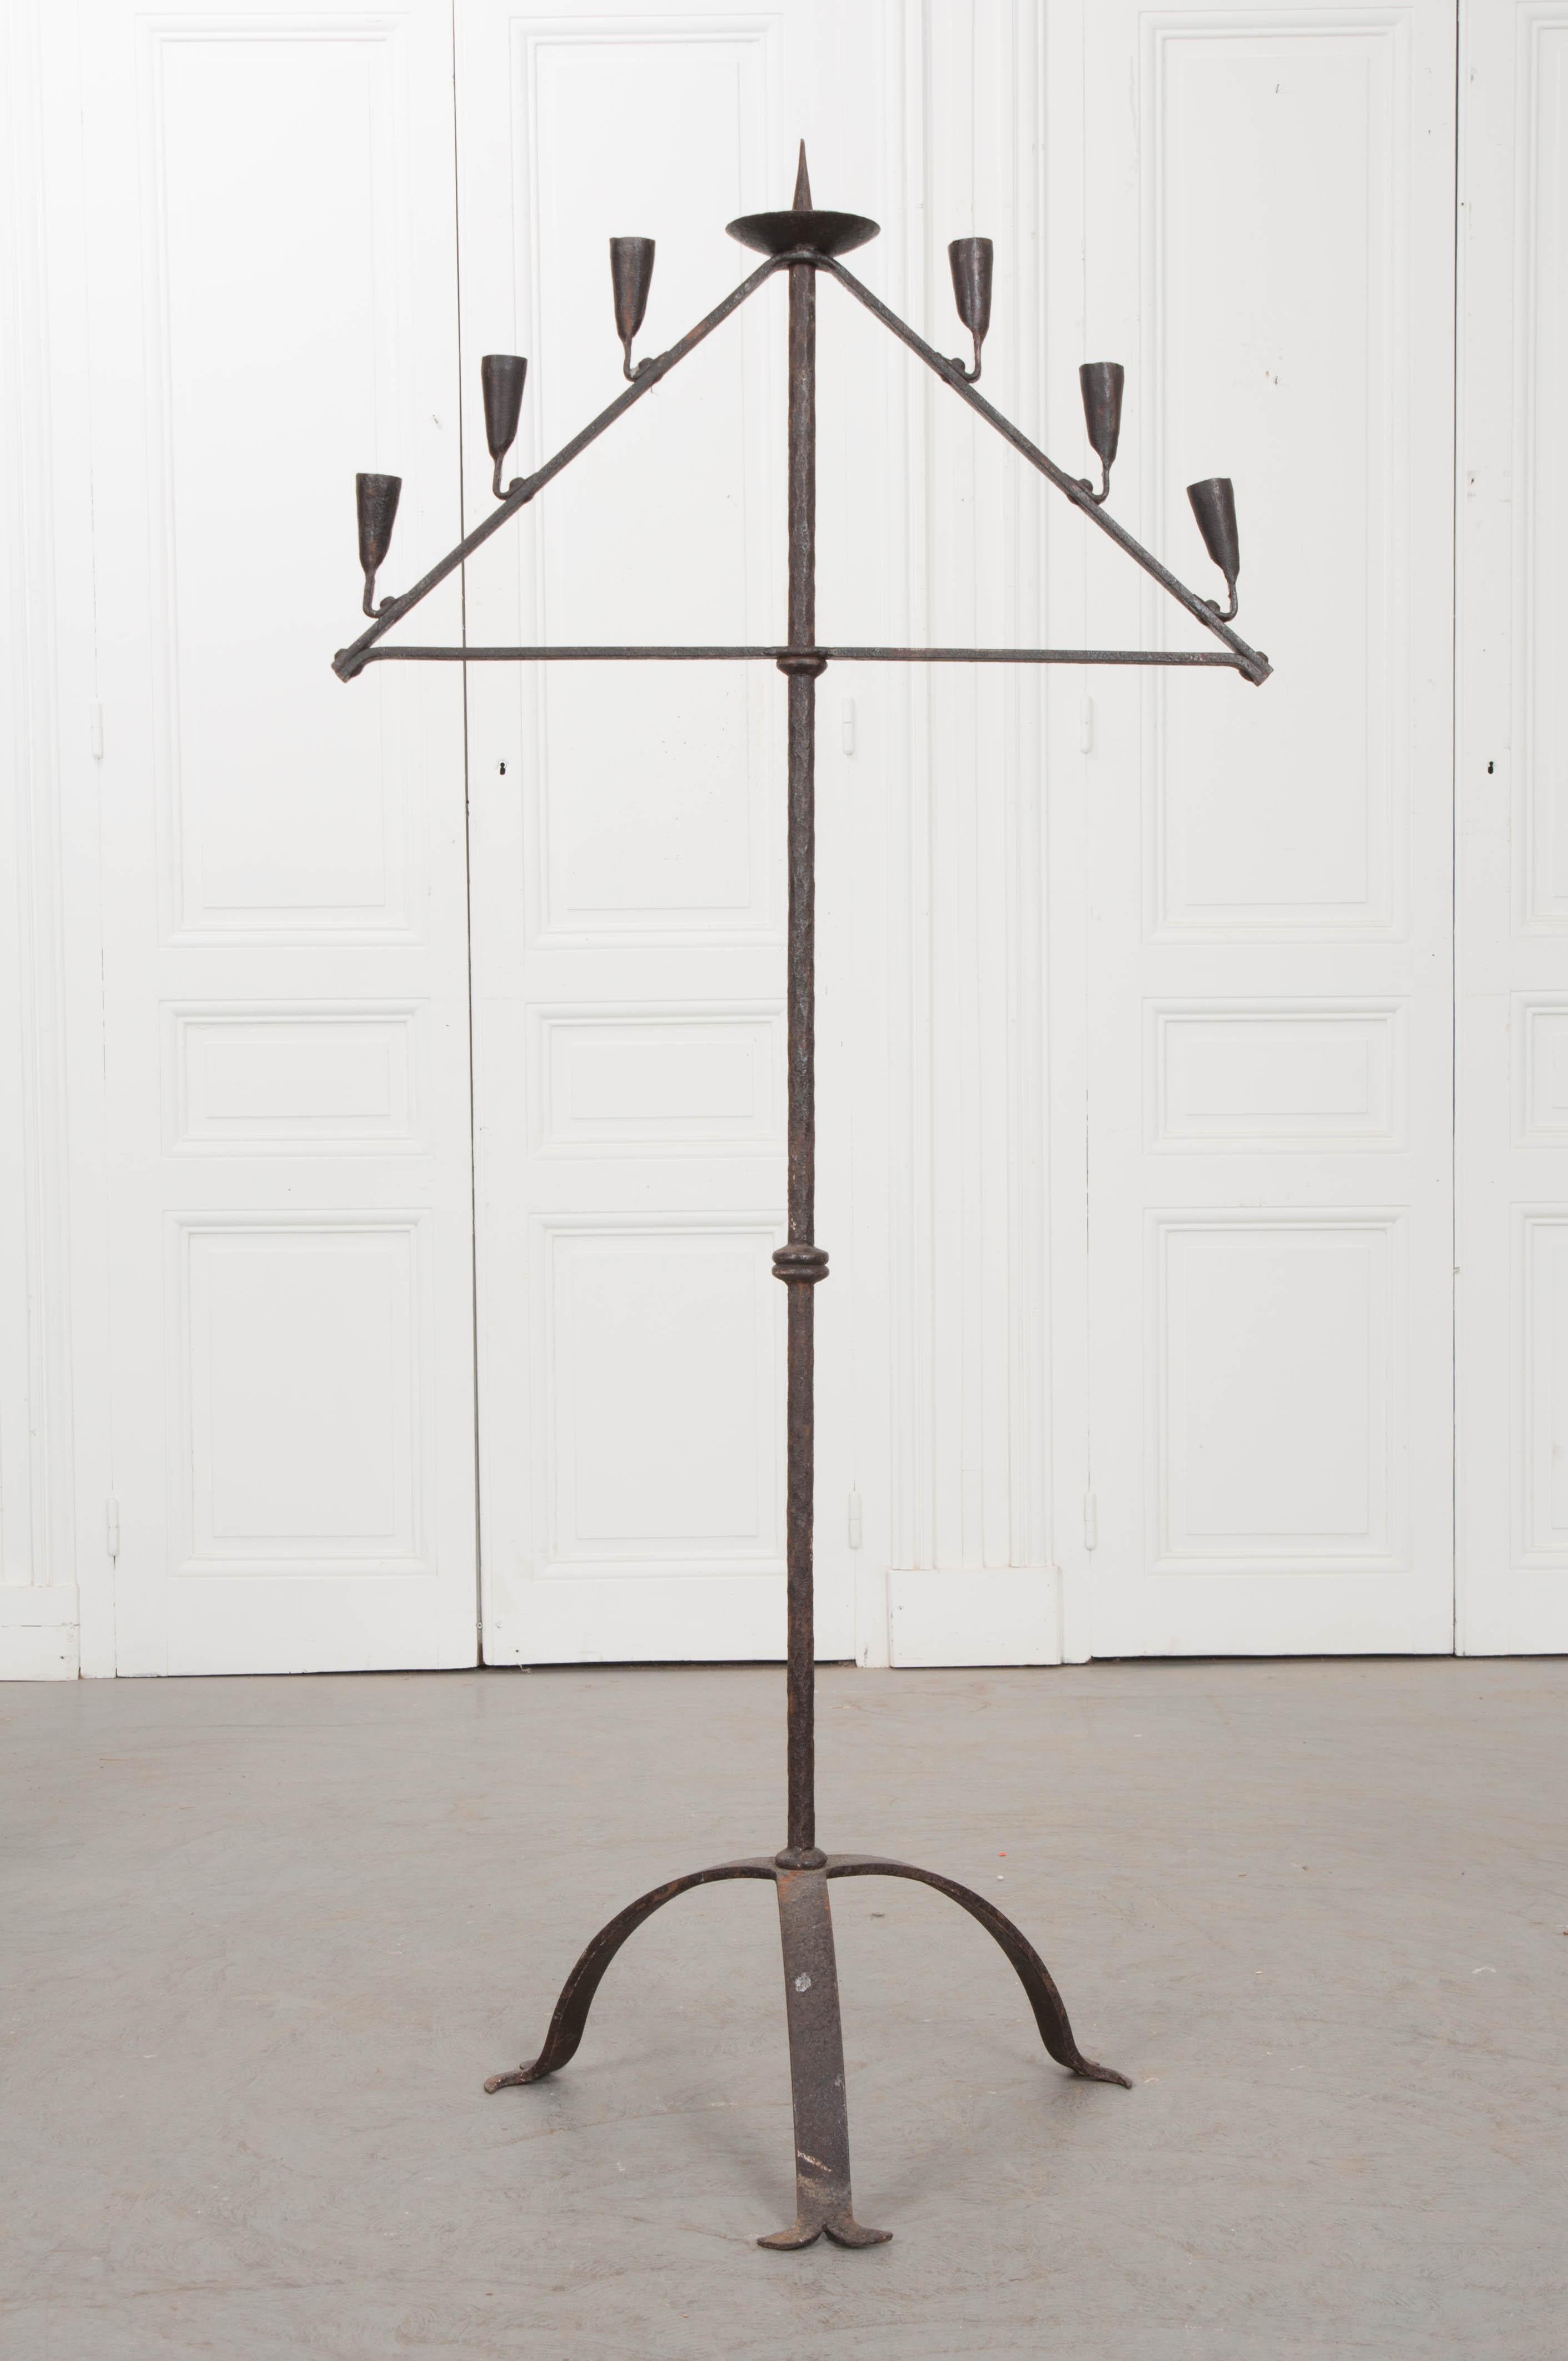 A spectacular hand-forged iron candelabra, made in England circa 1700. The fixture will hold seven candles, arranged in a triangular fashion. Sourced from an English church, the antique fixture has an outspoken Gothic aura that brings the din of